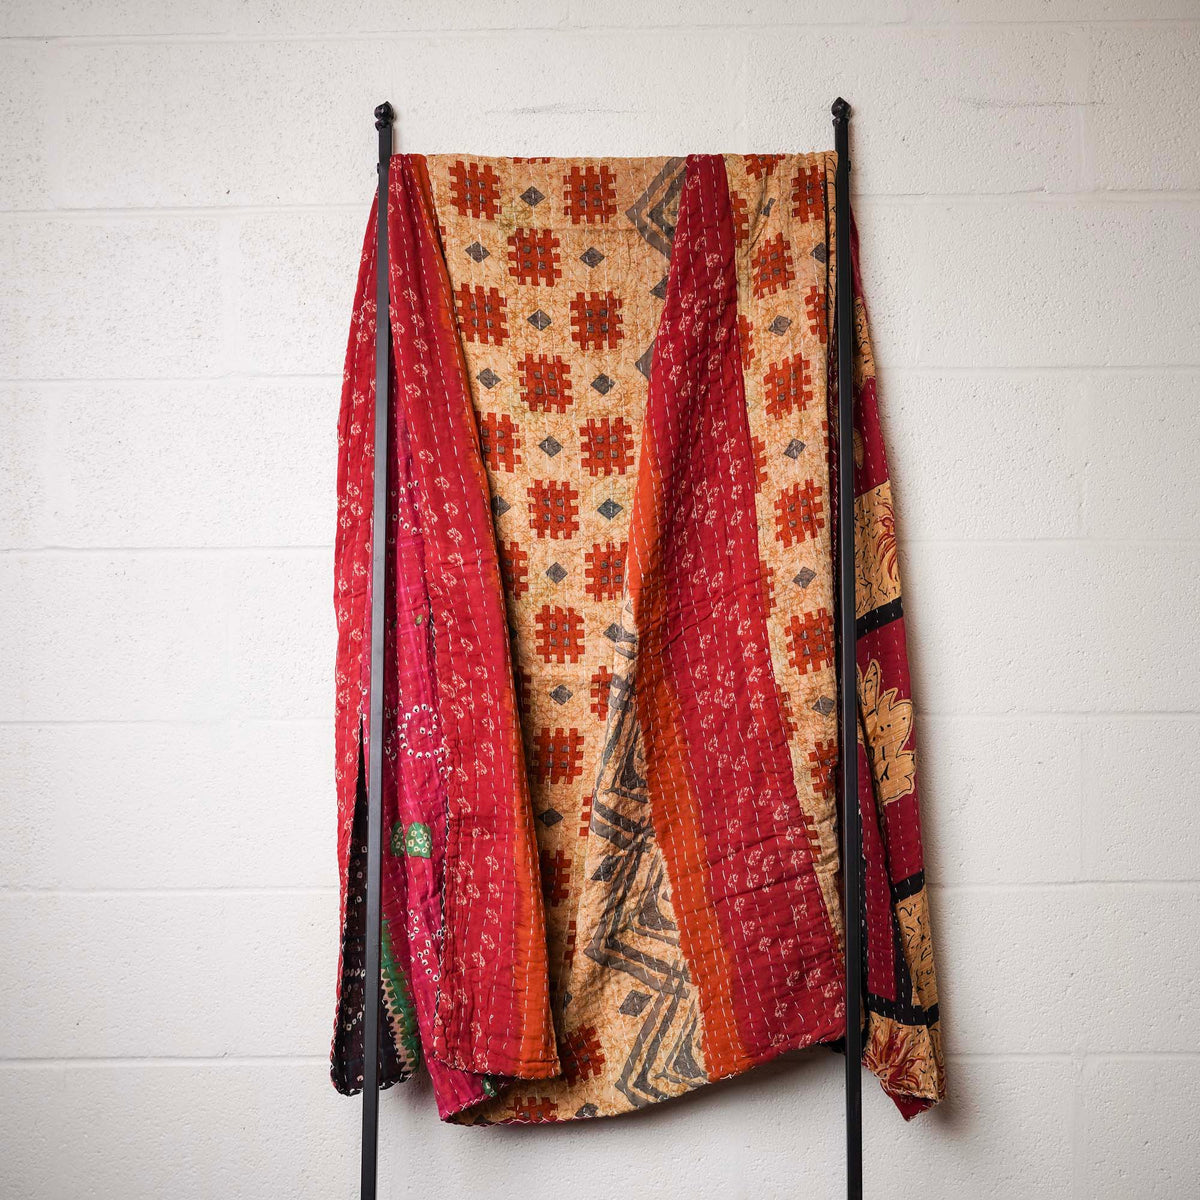 Kantha India Blanket One-of-a-Kind Handcrafted Quilted Pattern Throw ~ No. K-00567